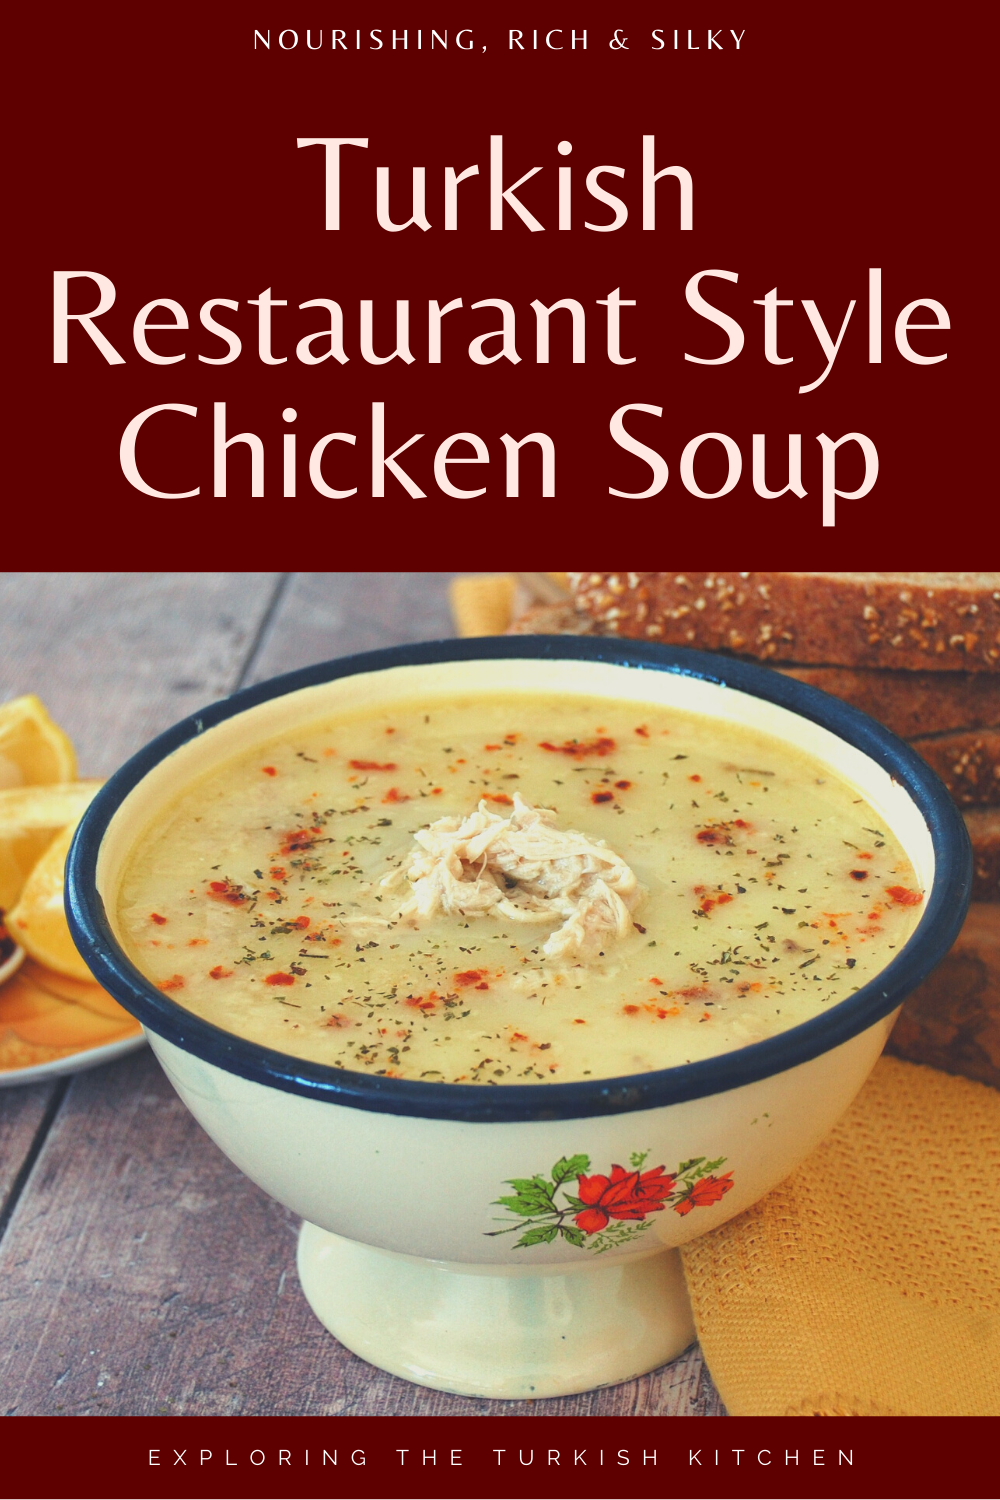 “Pinable image for Turkish chicken soup. Picture show soup in traditional village style enamle tablewear. Text overlay reads: 'Chicken soup. Turkish restaurant style Chicken soup. Exploring The Turkish Kitchen.com. 